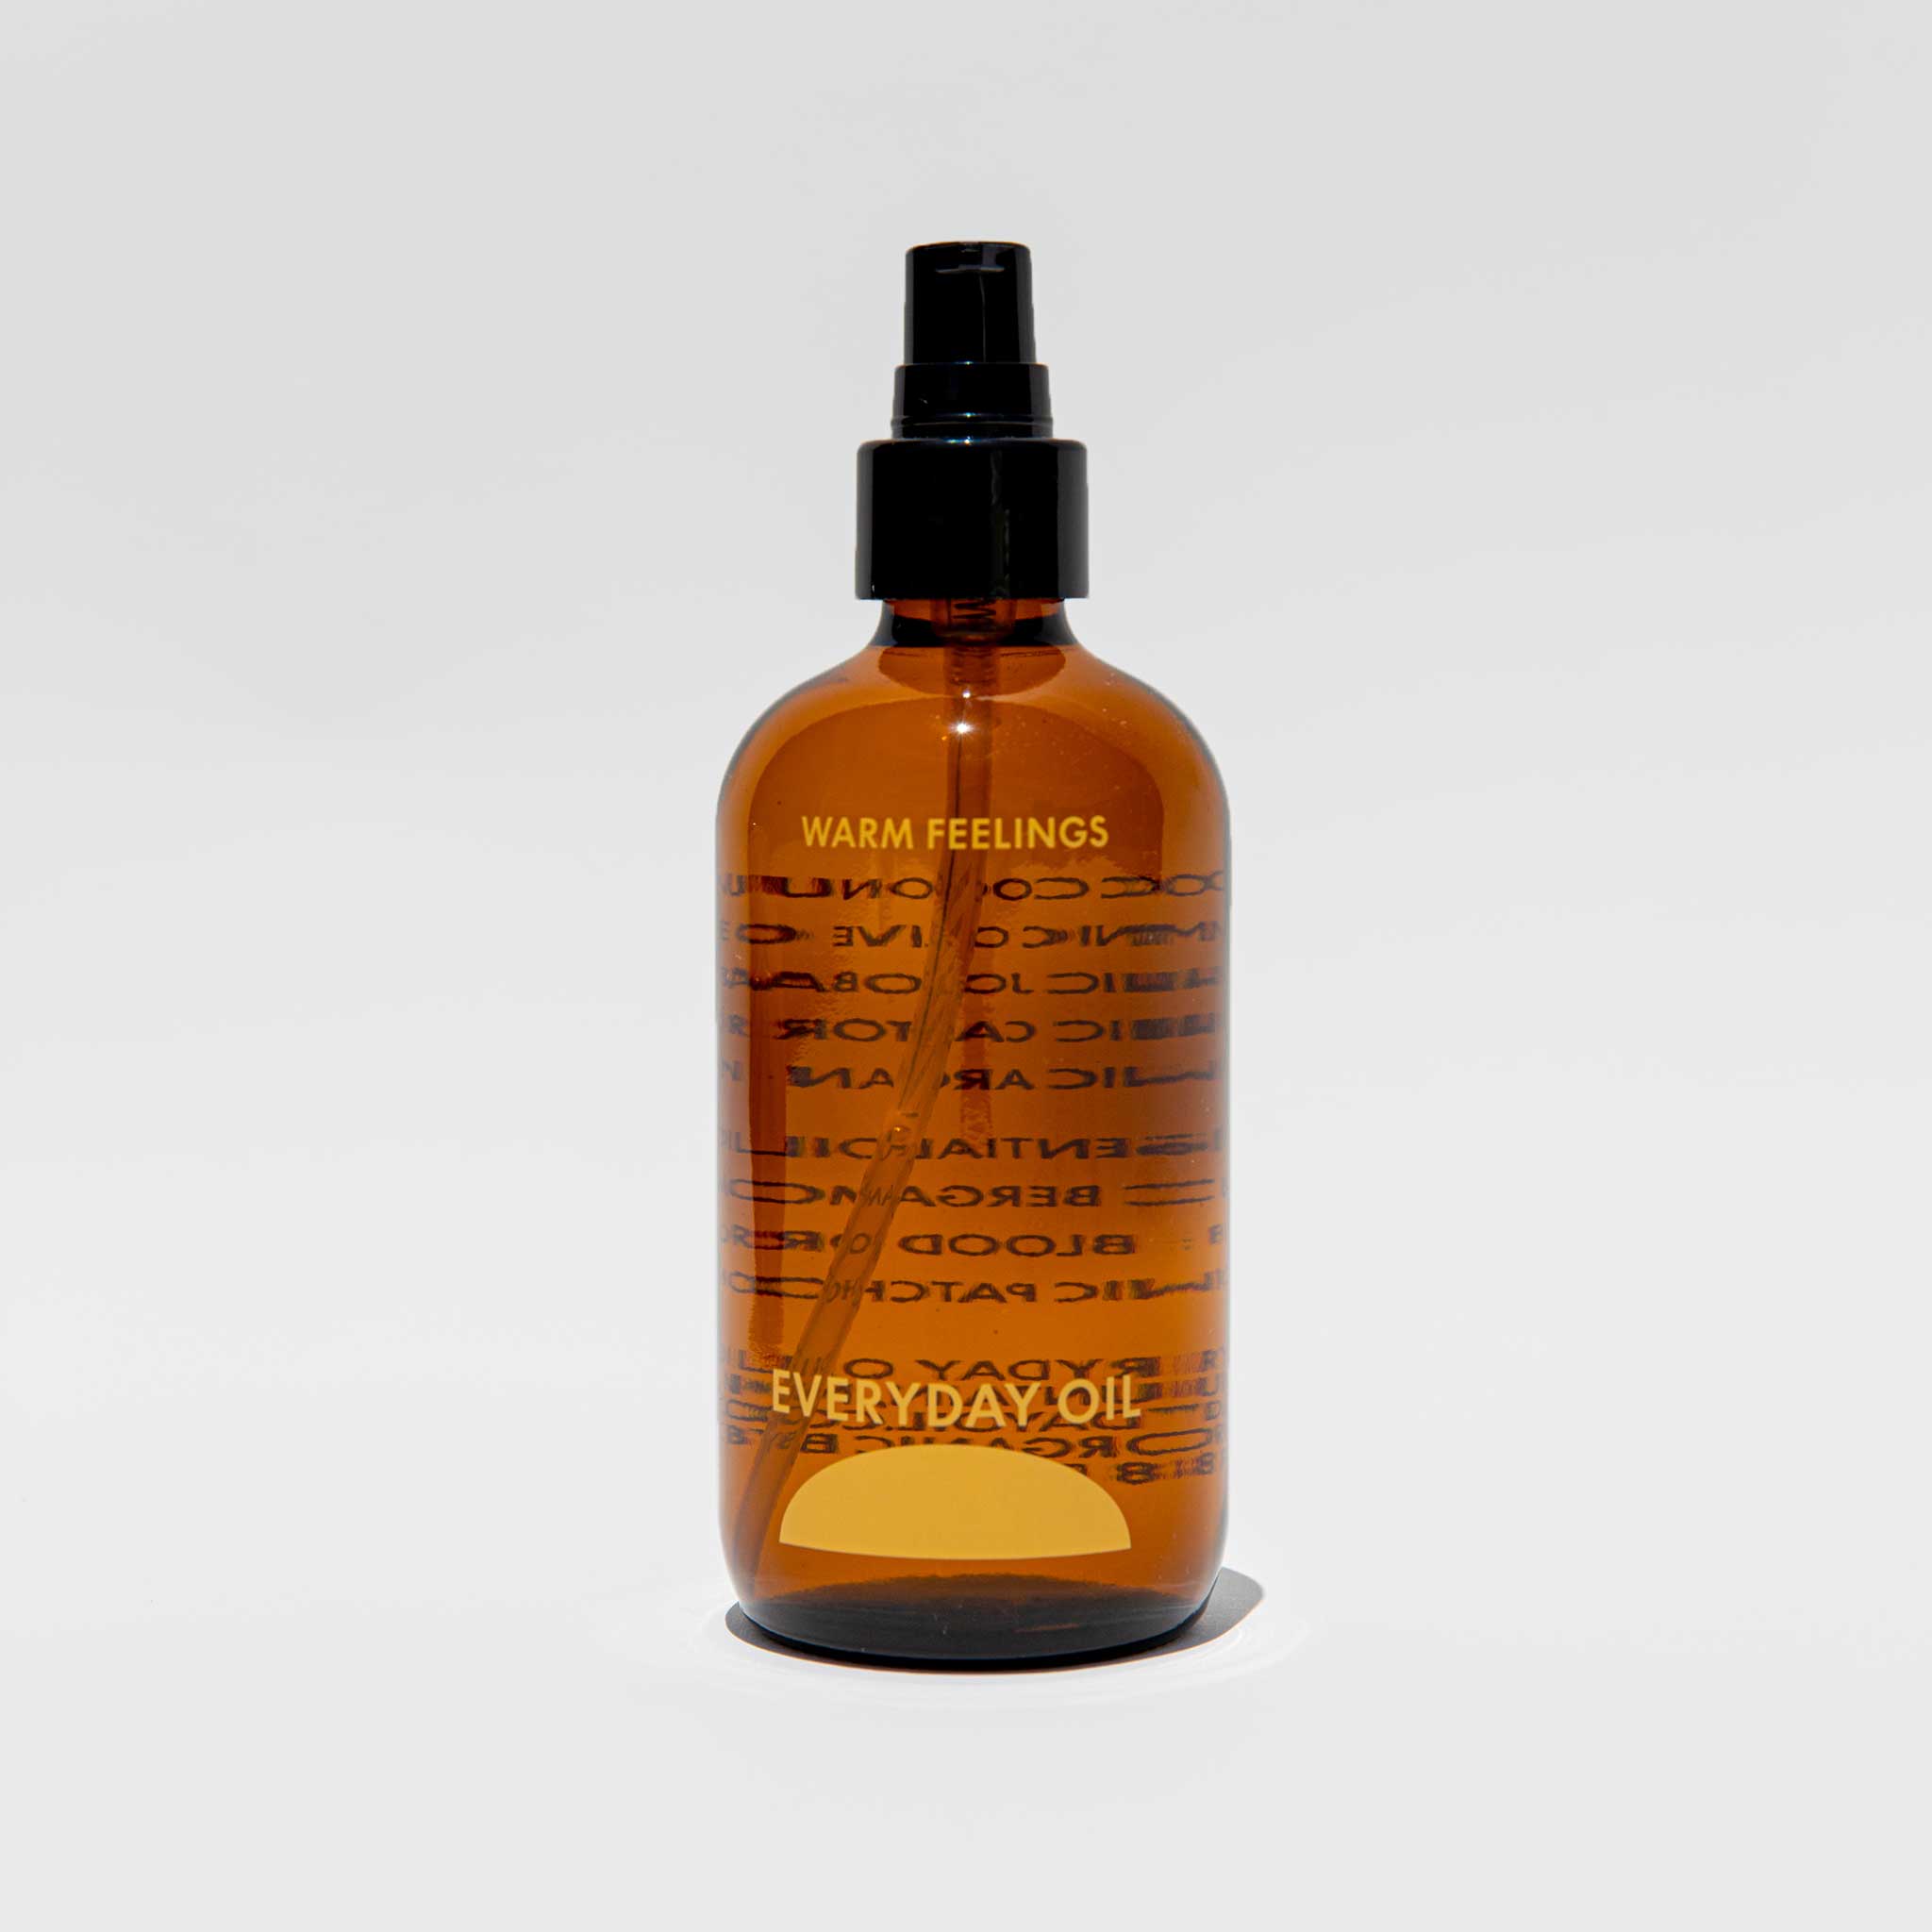 Close detial photo of the 8oz everyday oil warm feelings bottle.